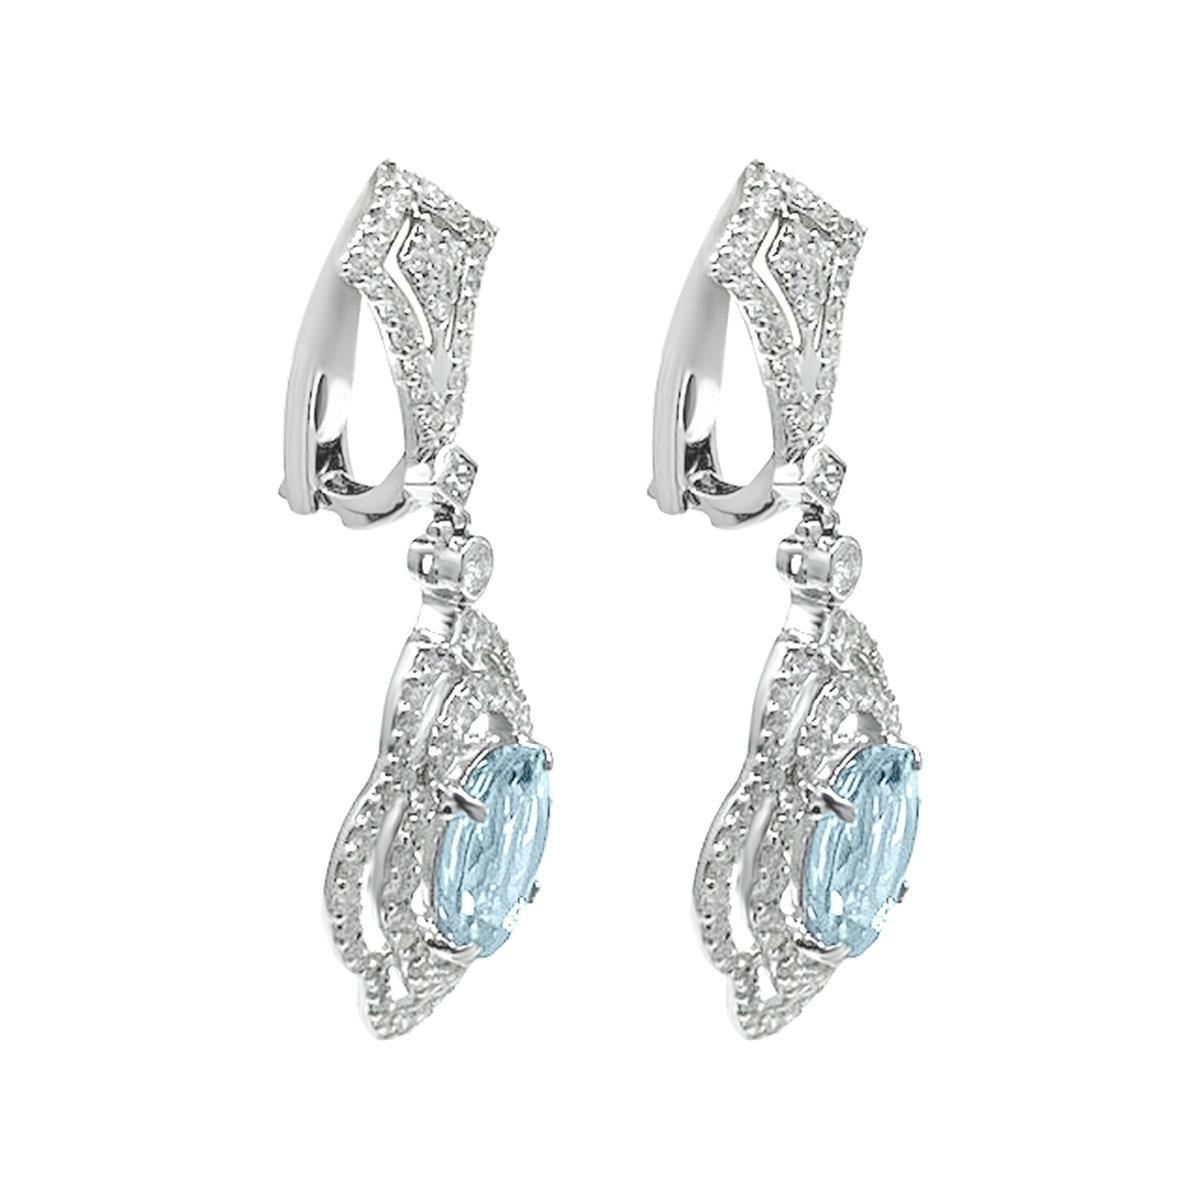 These Earring Have Stunning Dangling 4.57Cts Aquamarine In 10x8mm Oval Cut With Diamonds Around The Gemstone Captivates With It's Sea Blue Allure Crafted in 14K White Gold Adding A Touch Of Elegance To These Dangling Aquamarine Earring.

Style#